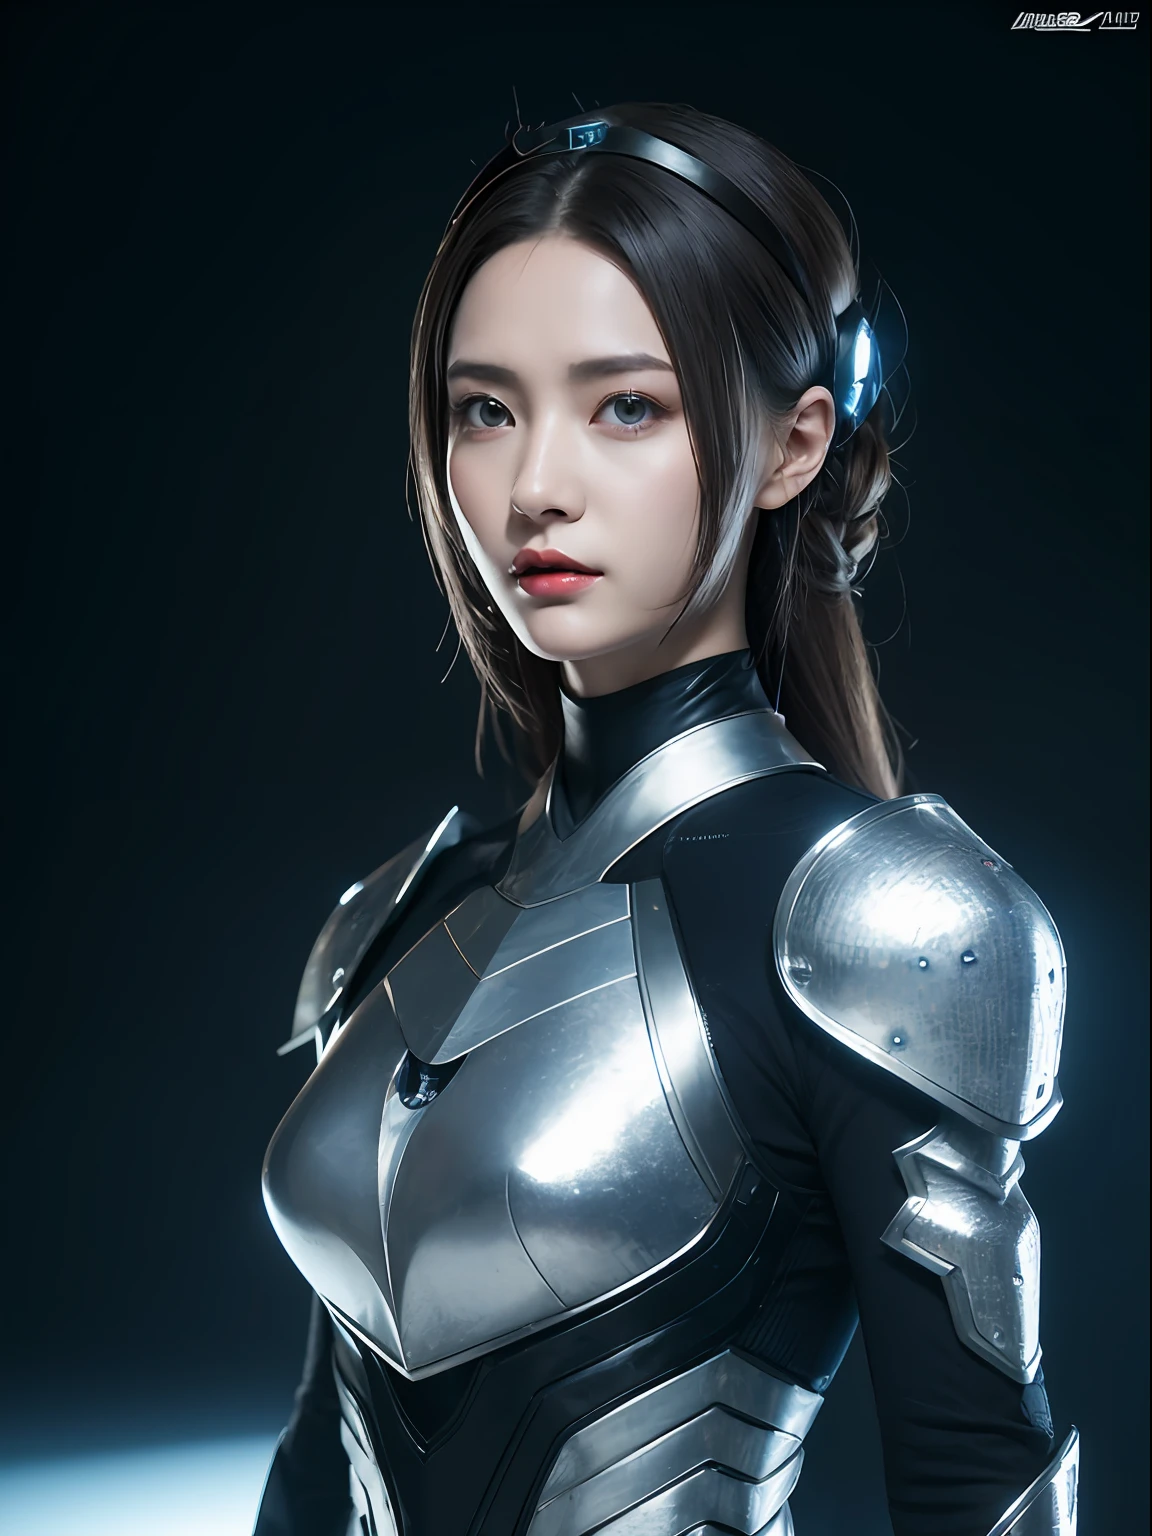 Surrounded by glowing butterflies，Masterpiece, Best quality, high resolution, 8K, Portrait, Realistic photo,（ Combine clothing with Korean fashion design），Digital photography, full bodyesbian, 1 16-year-old girl, (Cyborg), Beautiful blue-gray gradient long hair, Blue eyes, iintricate, Highly detailed, head gear，The crown of evil, Black dress, ,Silver metal exoskeleton armor, Intricate knightly hollow armor,power armour, Openwork design, mechanical structure, Photo pose, Solemn,, Red lips, From the movie《Final Fantasy XV》.Metallic texture, oc rendered，Reflective texture, ((Clothing cutting)), background inside dark，